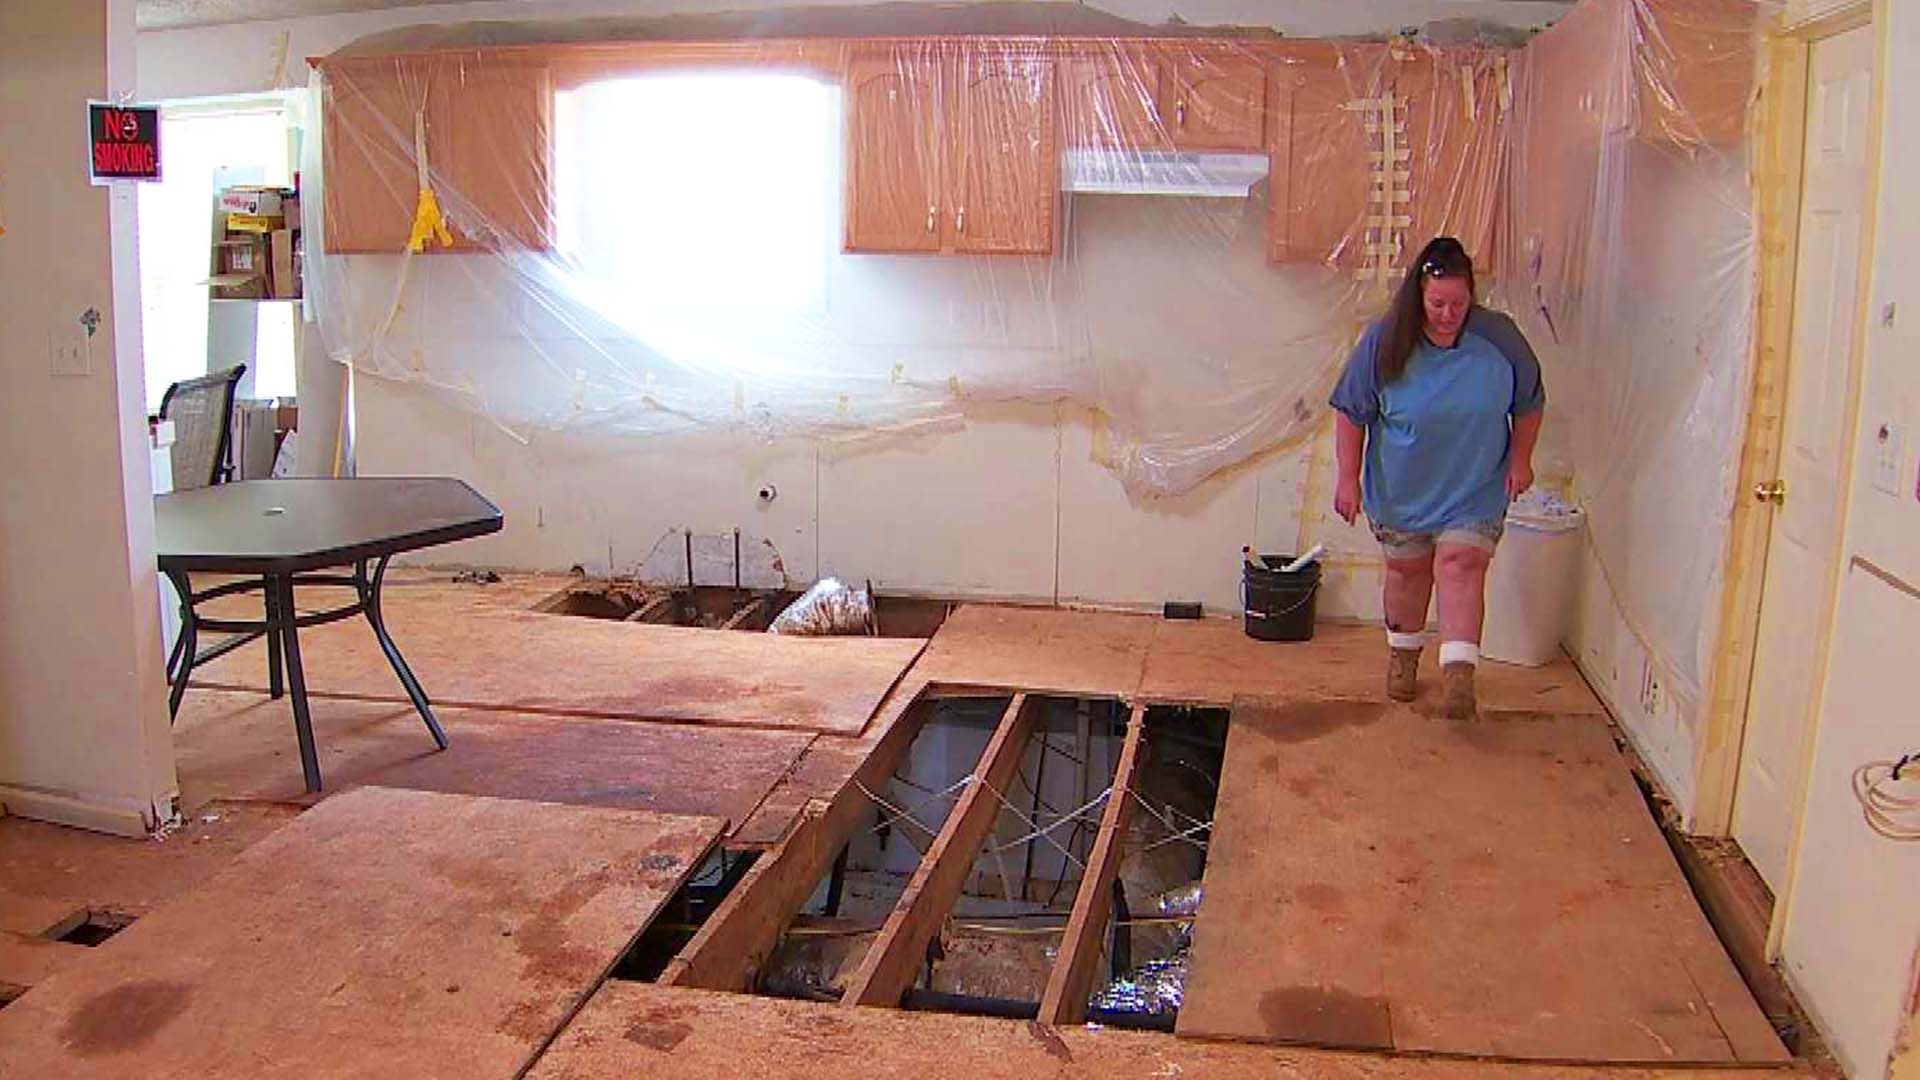 It has cost almost $400,000 to repair a Tennessee home after a sinkhole developed underneath.